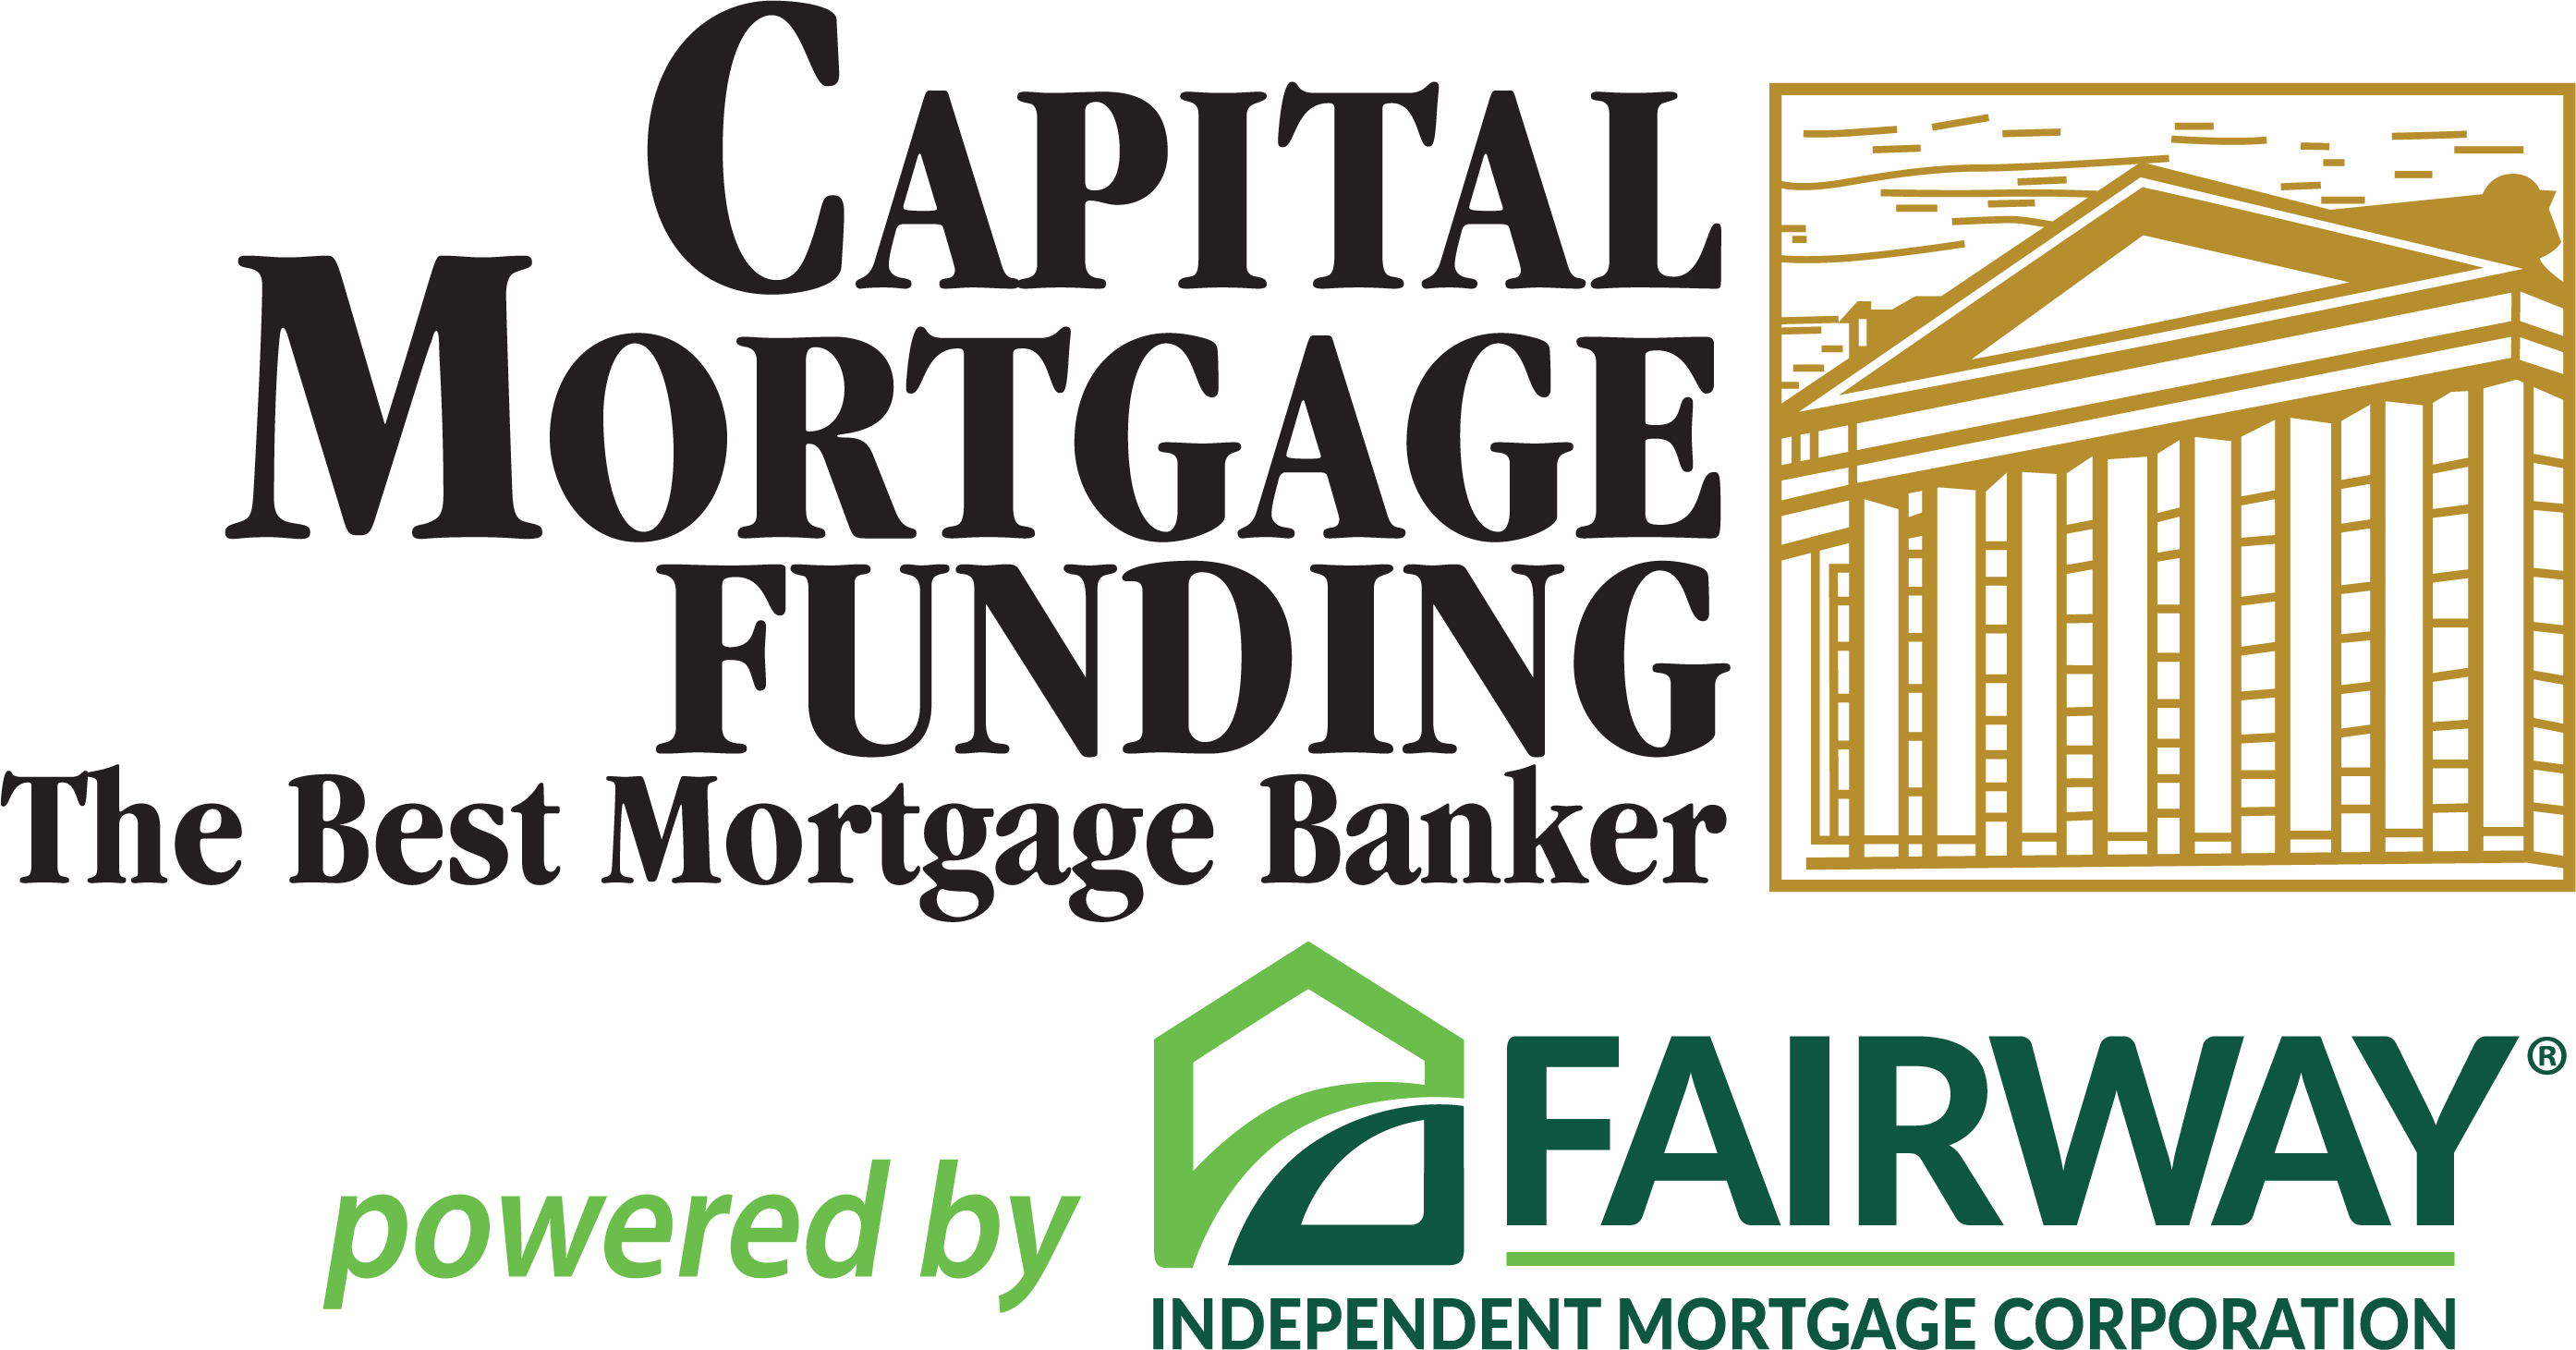 Capital Mortgage Funding Powered by Fairway Independent Mortgage Corporation logo